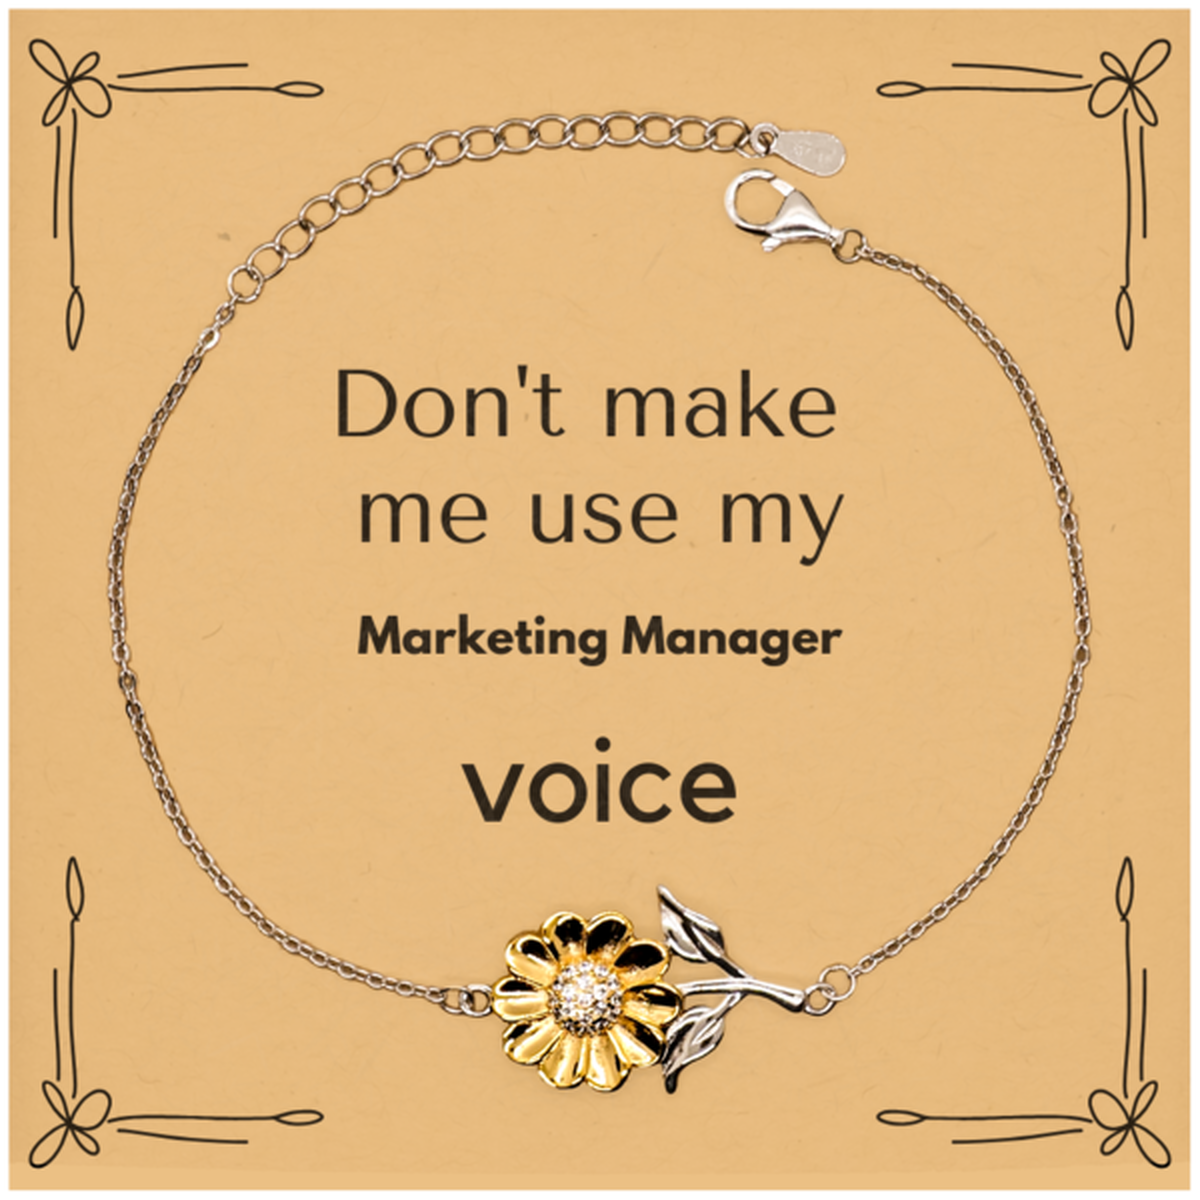 Don't make me use my Marketing Manager voice, Sarcasm Marketing Manager Card Gifts, Christmas Marketing Manager Sunflower Bracelet Birthday Unique Gifts For Marketing Manager Coworkers, Men, Women, Colleague, Friends